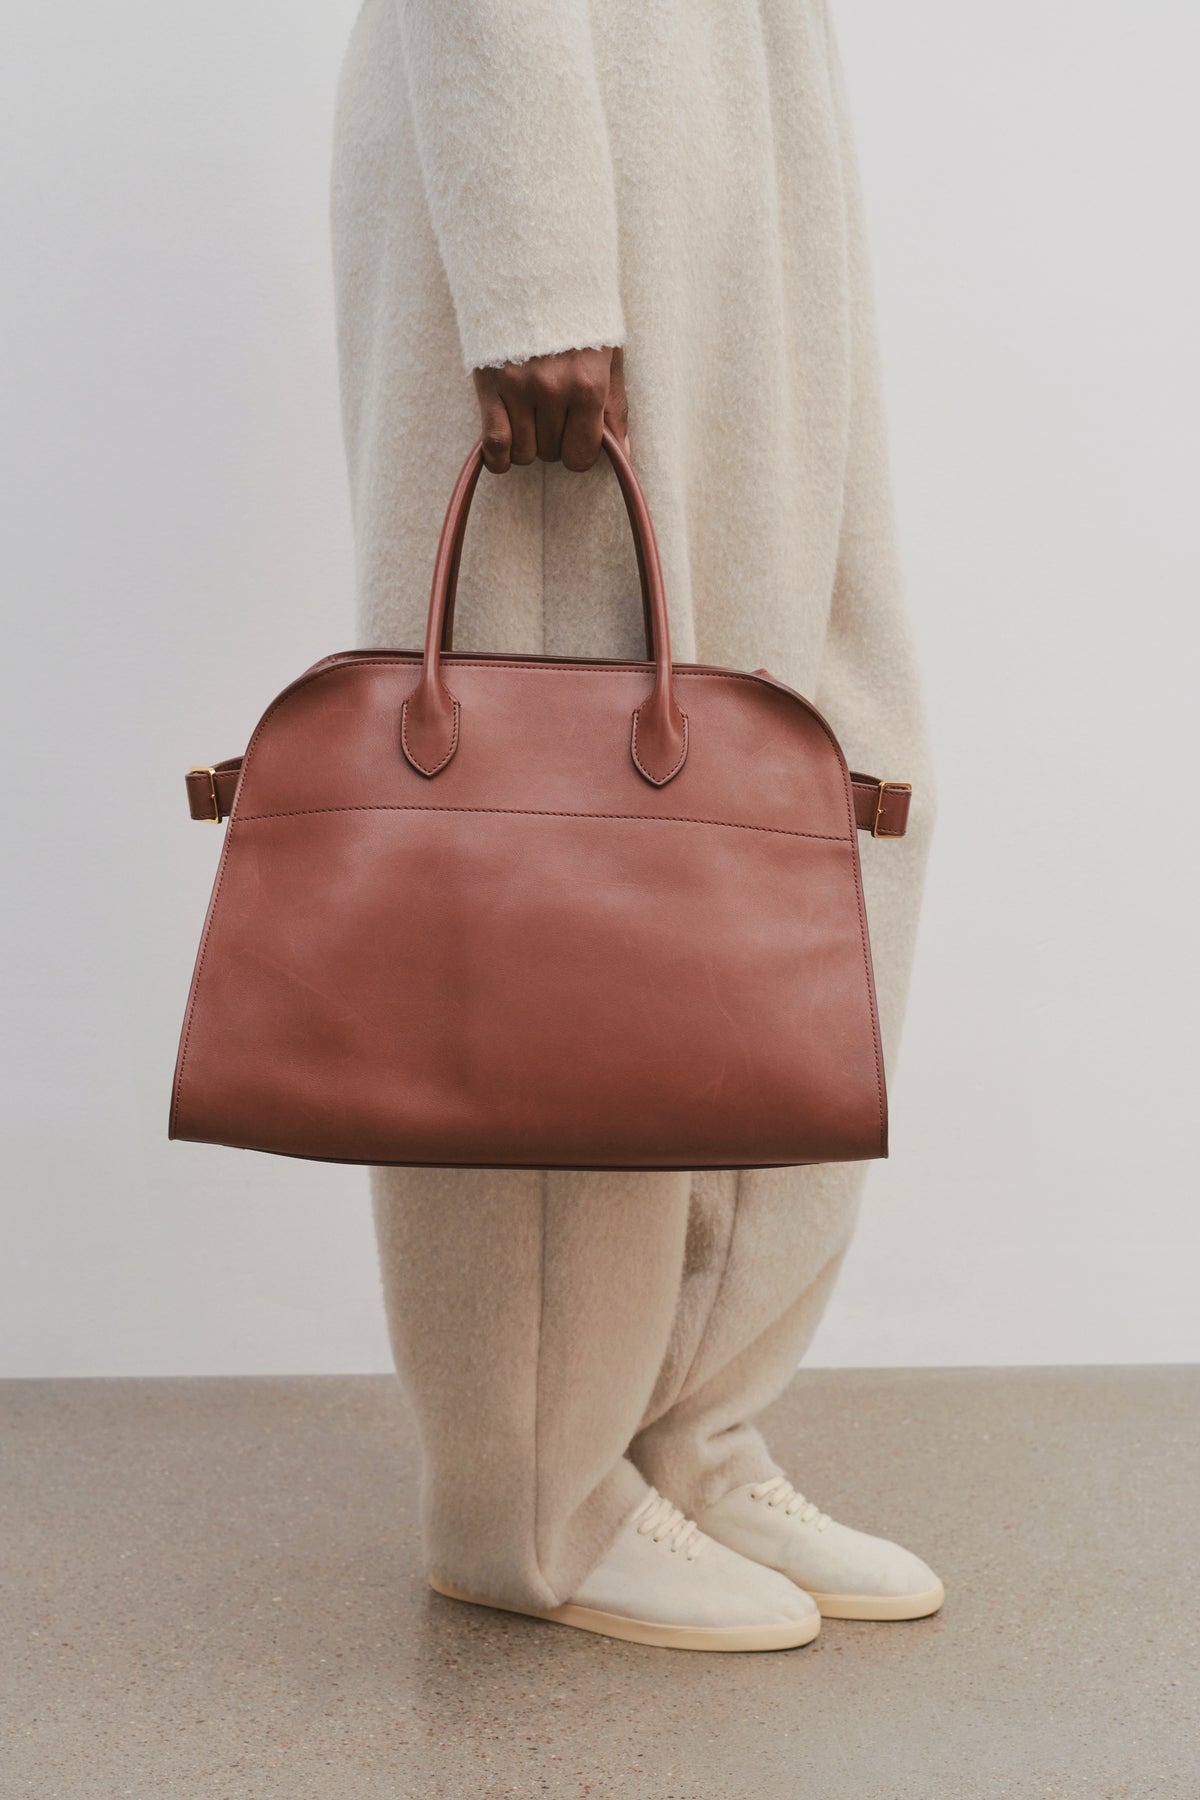 The Row Margaux 15 Leather Handbag in Brown